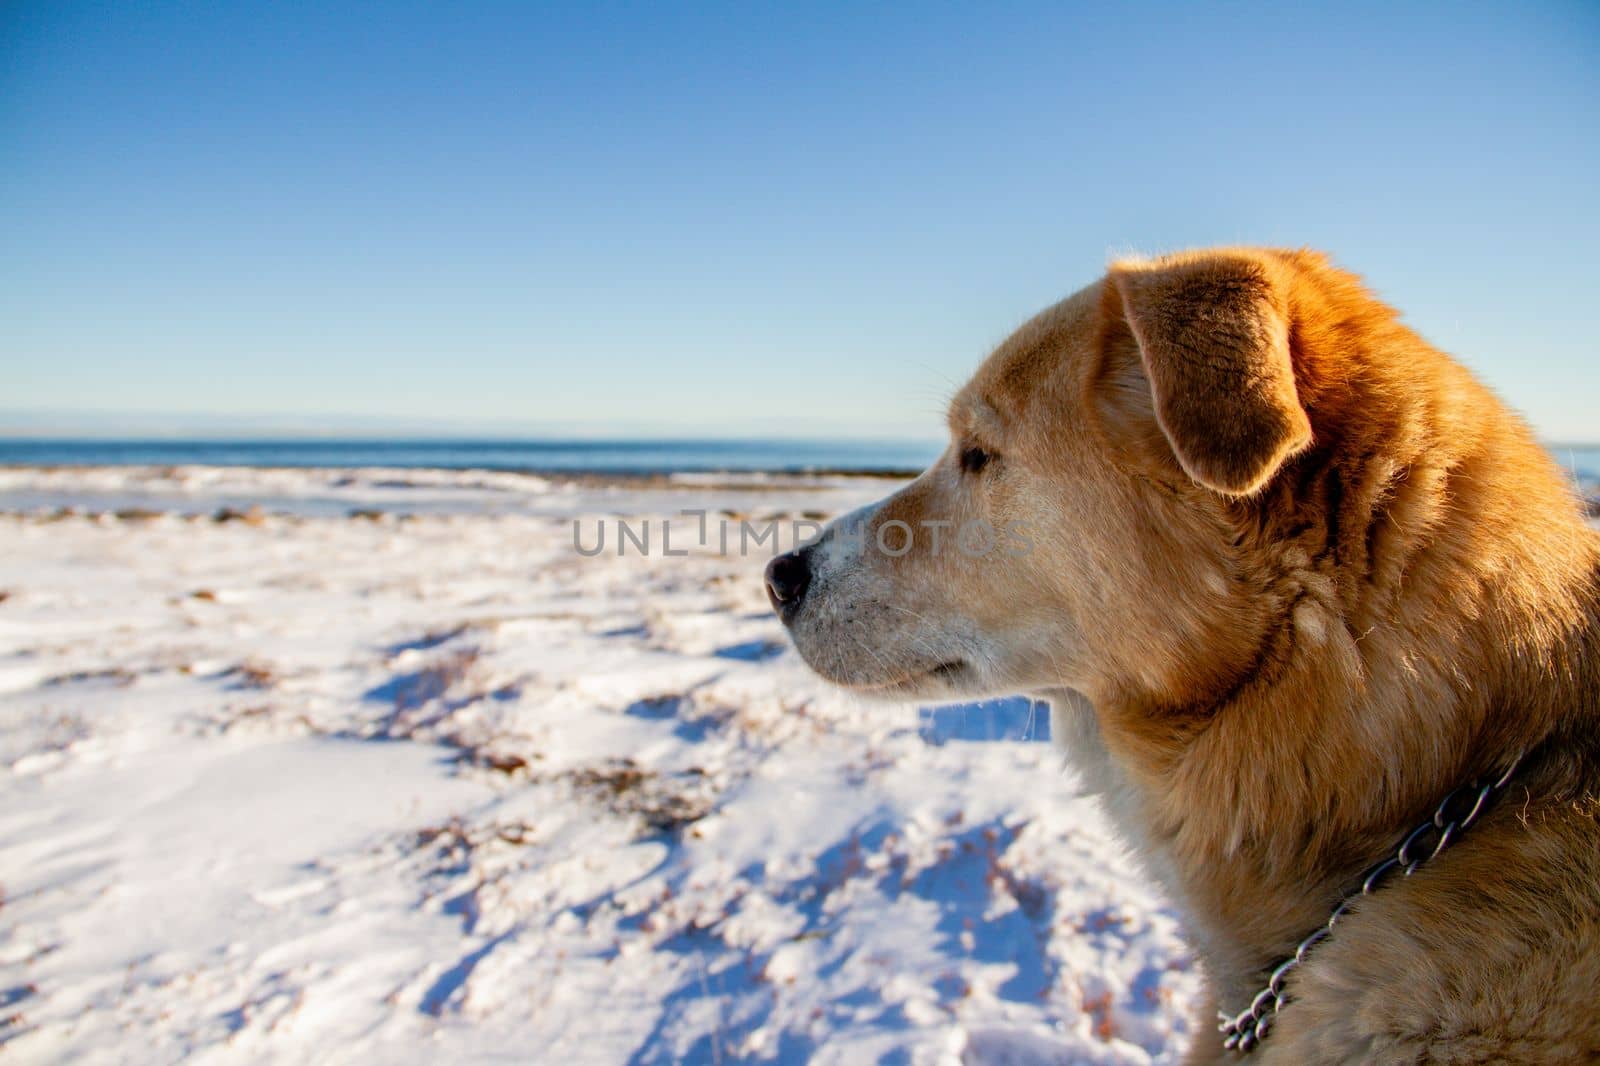 Close-up of a yellow Labrador dog staring with a snowy arctic landscape in the background by Granchinho